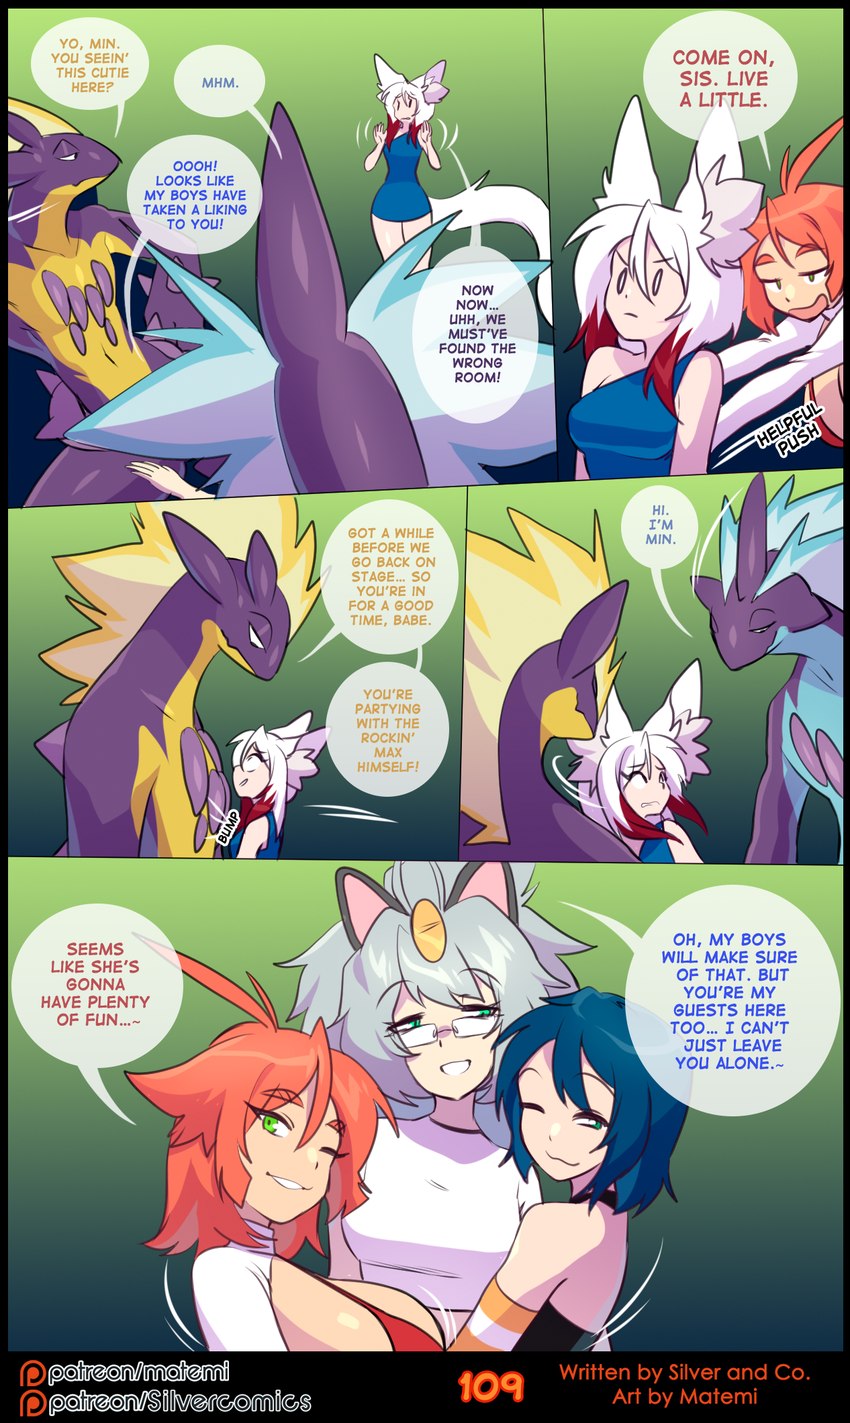 meagan, sergen, max, min, kat, and etc (silver soul (comic) and etc) created by matemi